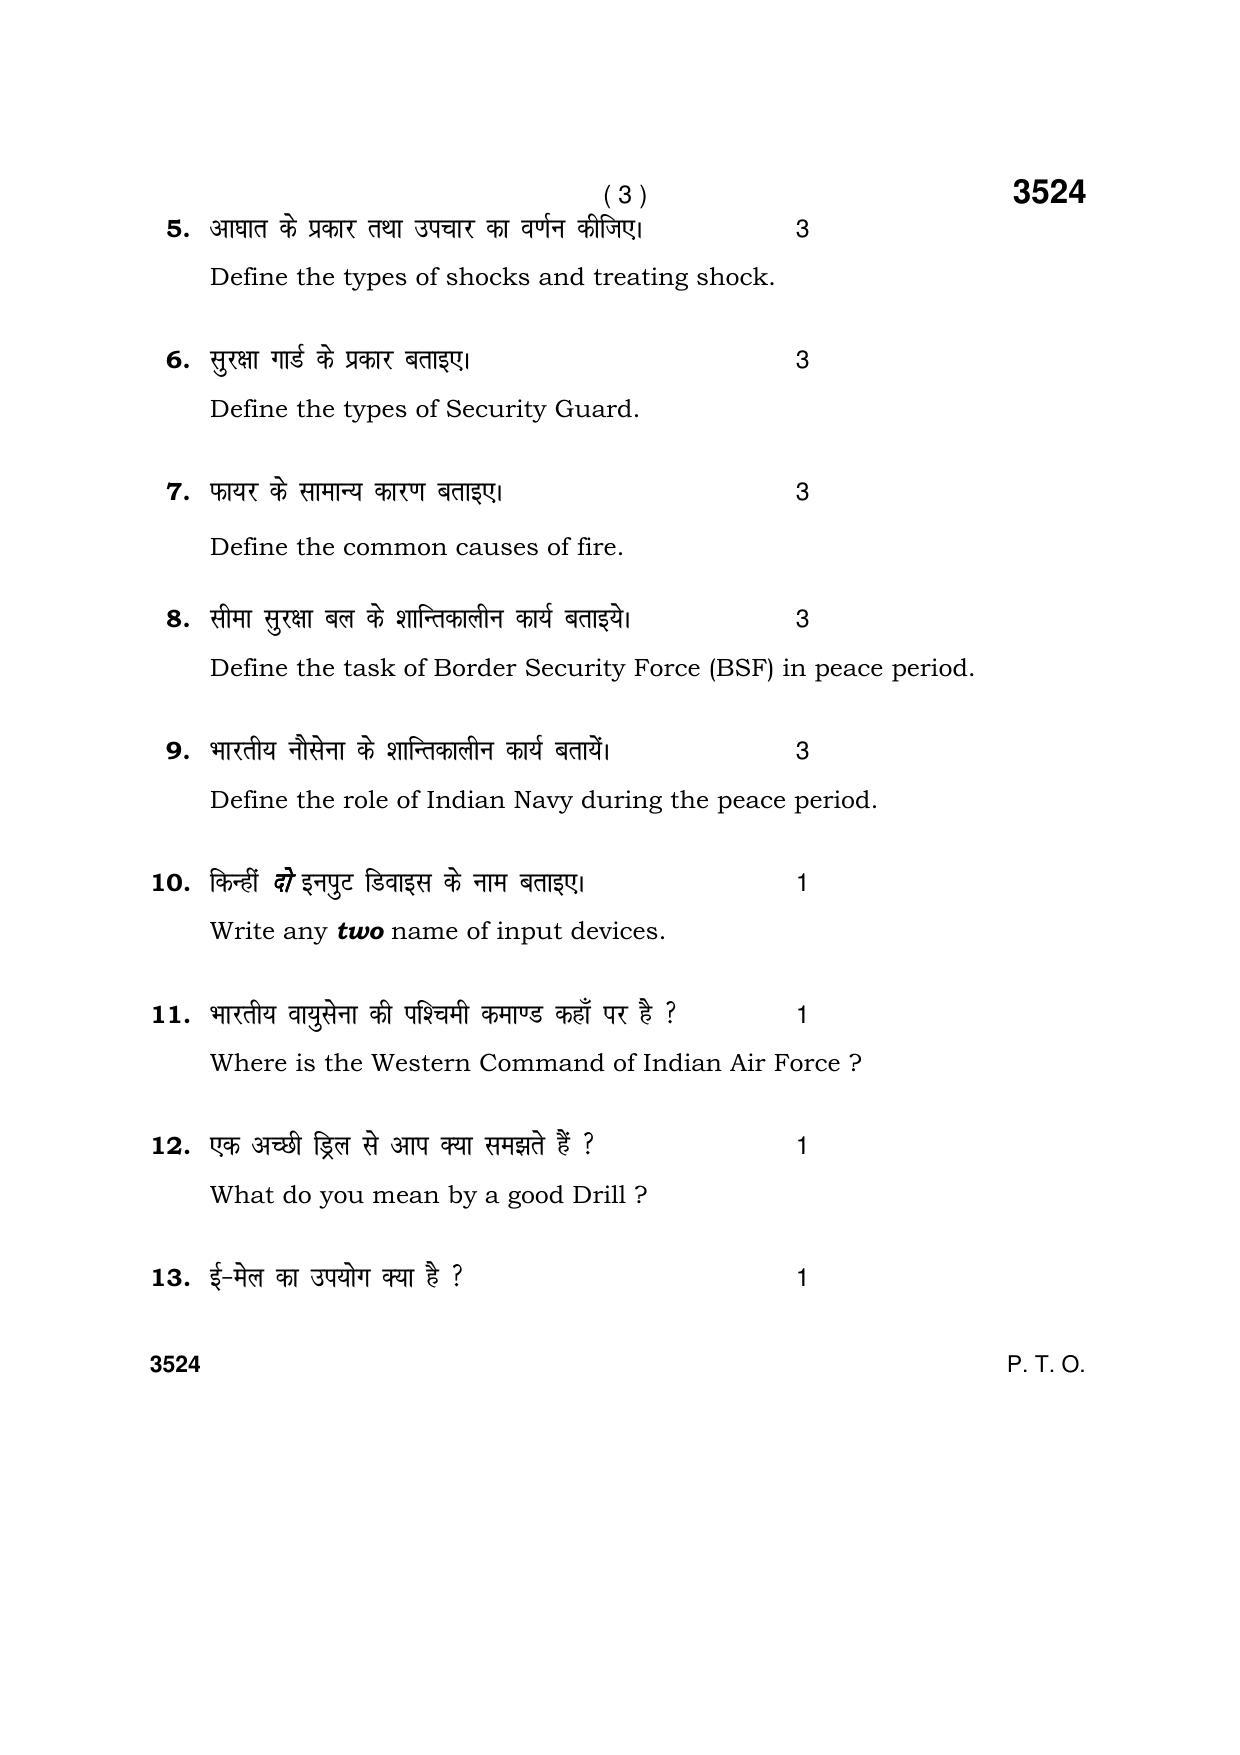 Haryana Board HBSE Class 10 Security 2018 Question Paper - Page 3